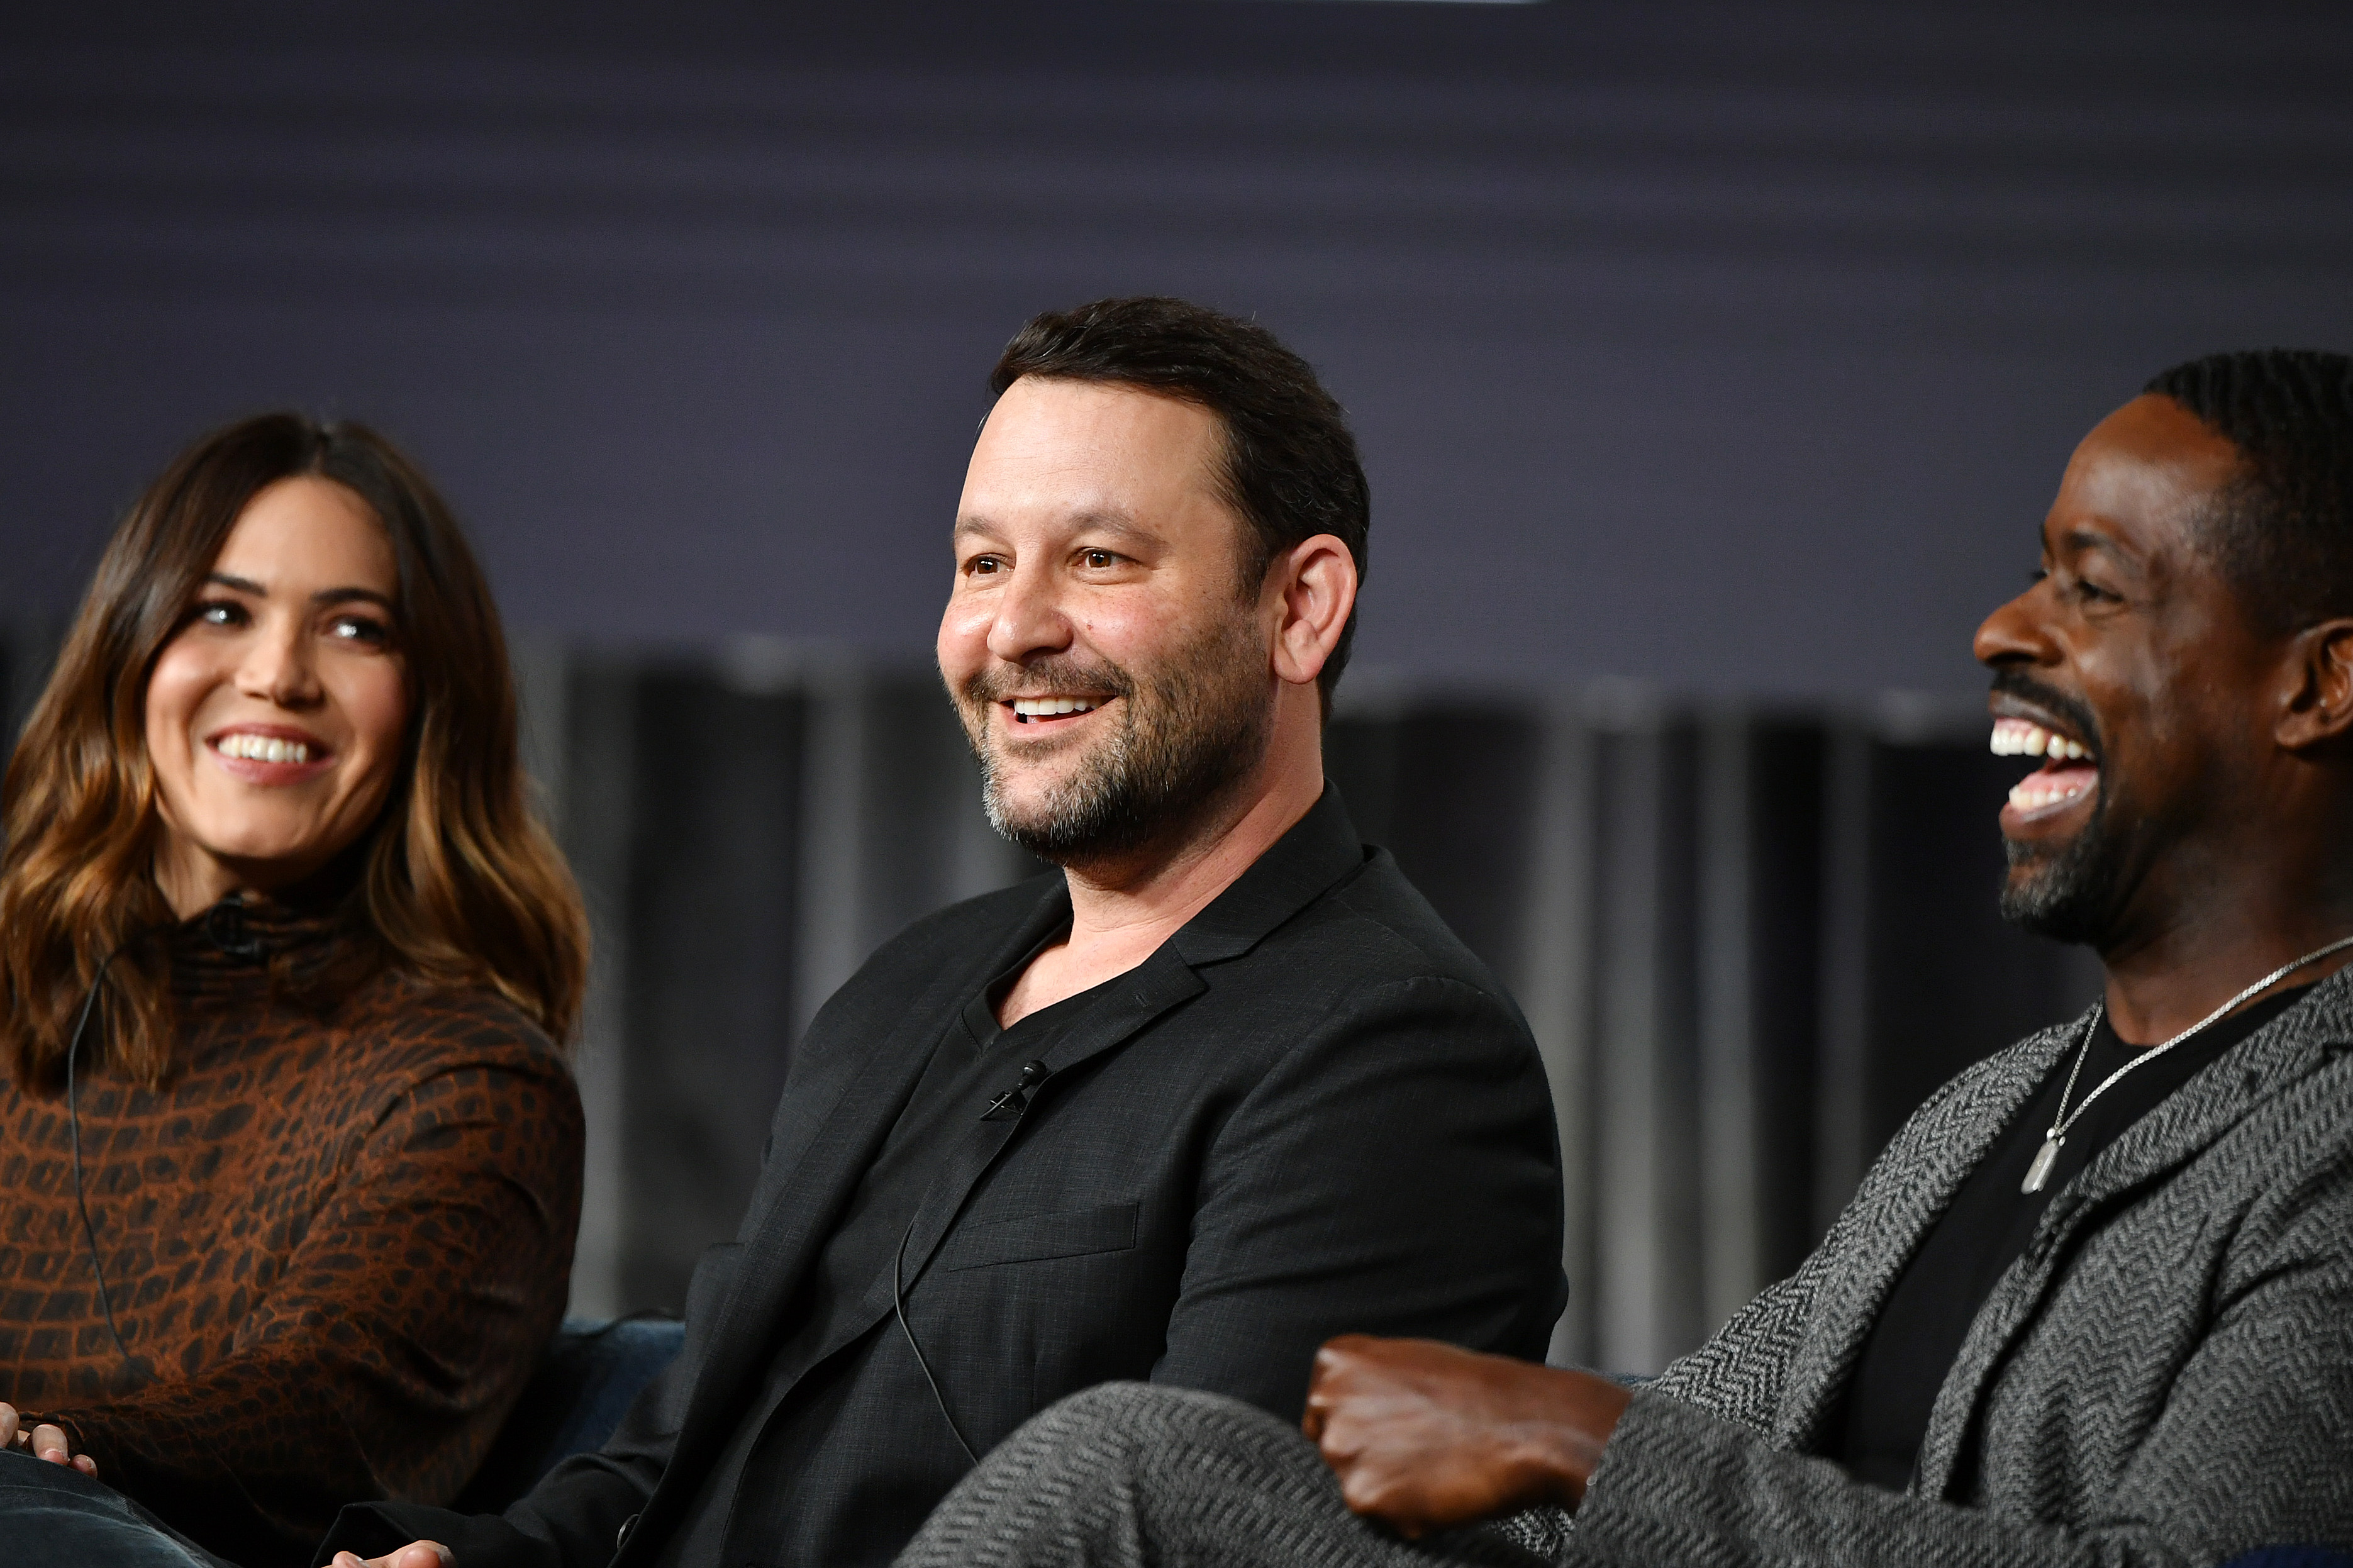 'This Is Us' Season 6 cast and crew, Mandy Moore, Dan Fogelman, and Sterling K. Brown, gather onstage for an event. Moore wears a brown and black sweater. Fogelman wears a black blazer over a black shirt. Brown wears a gray blazer over a black shirt. The 'This Is Us' series finale hasn't been written yet.